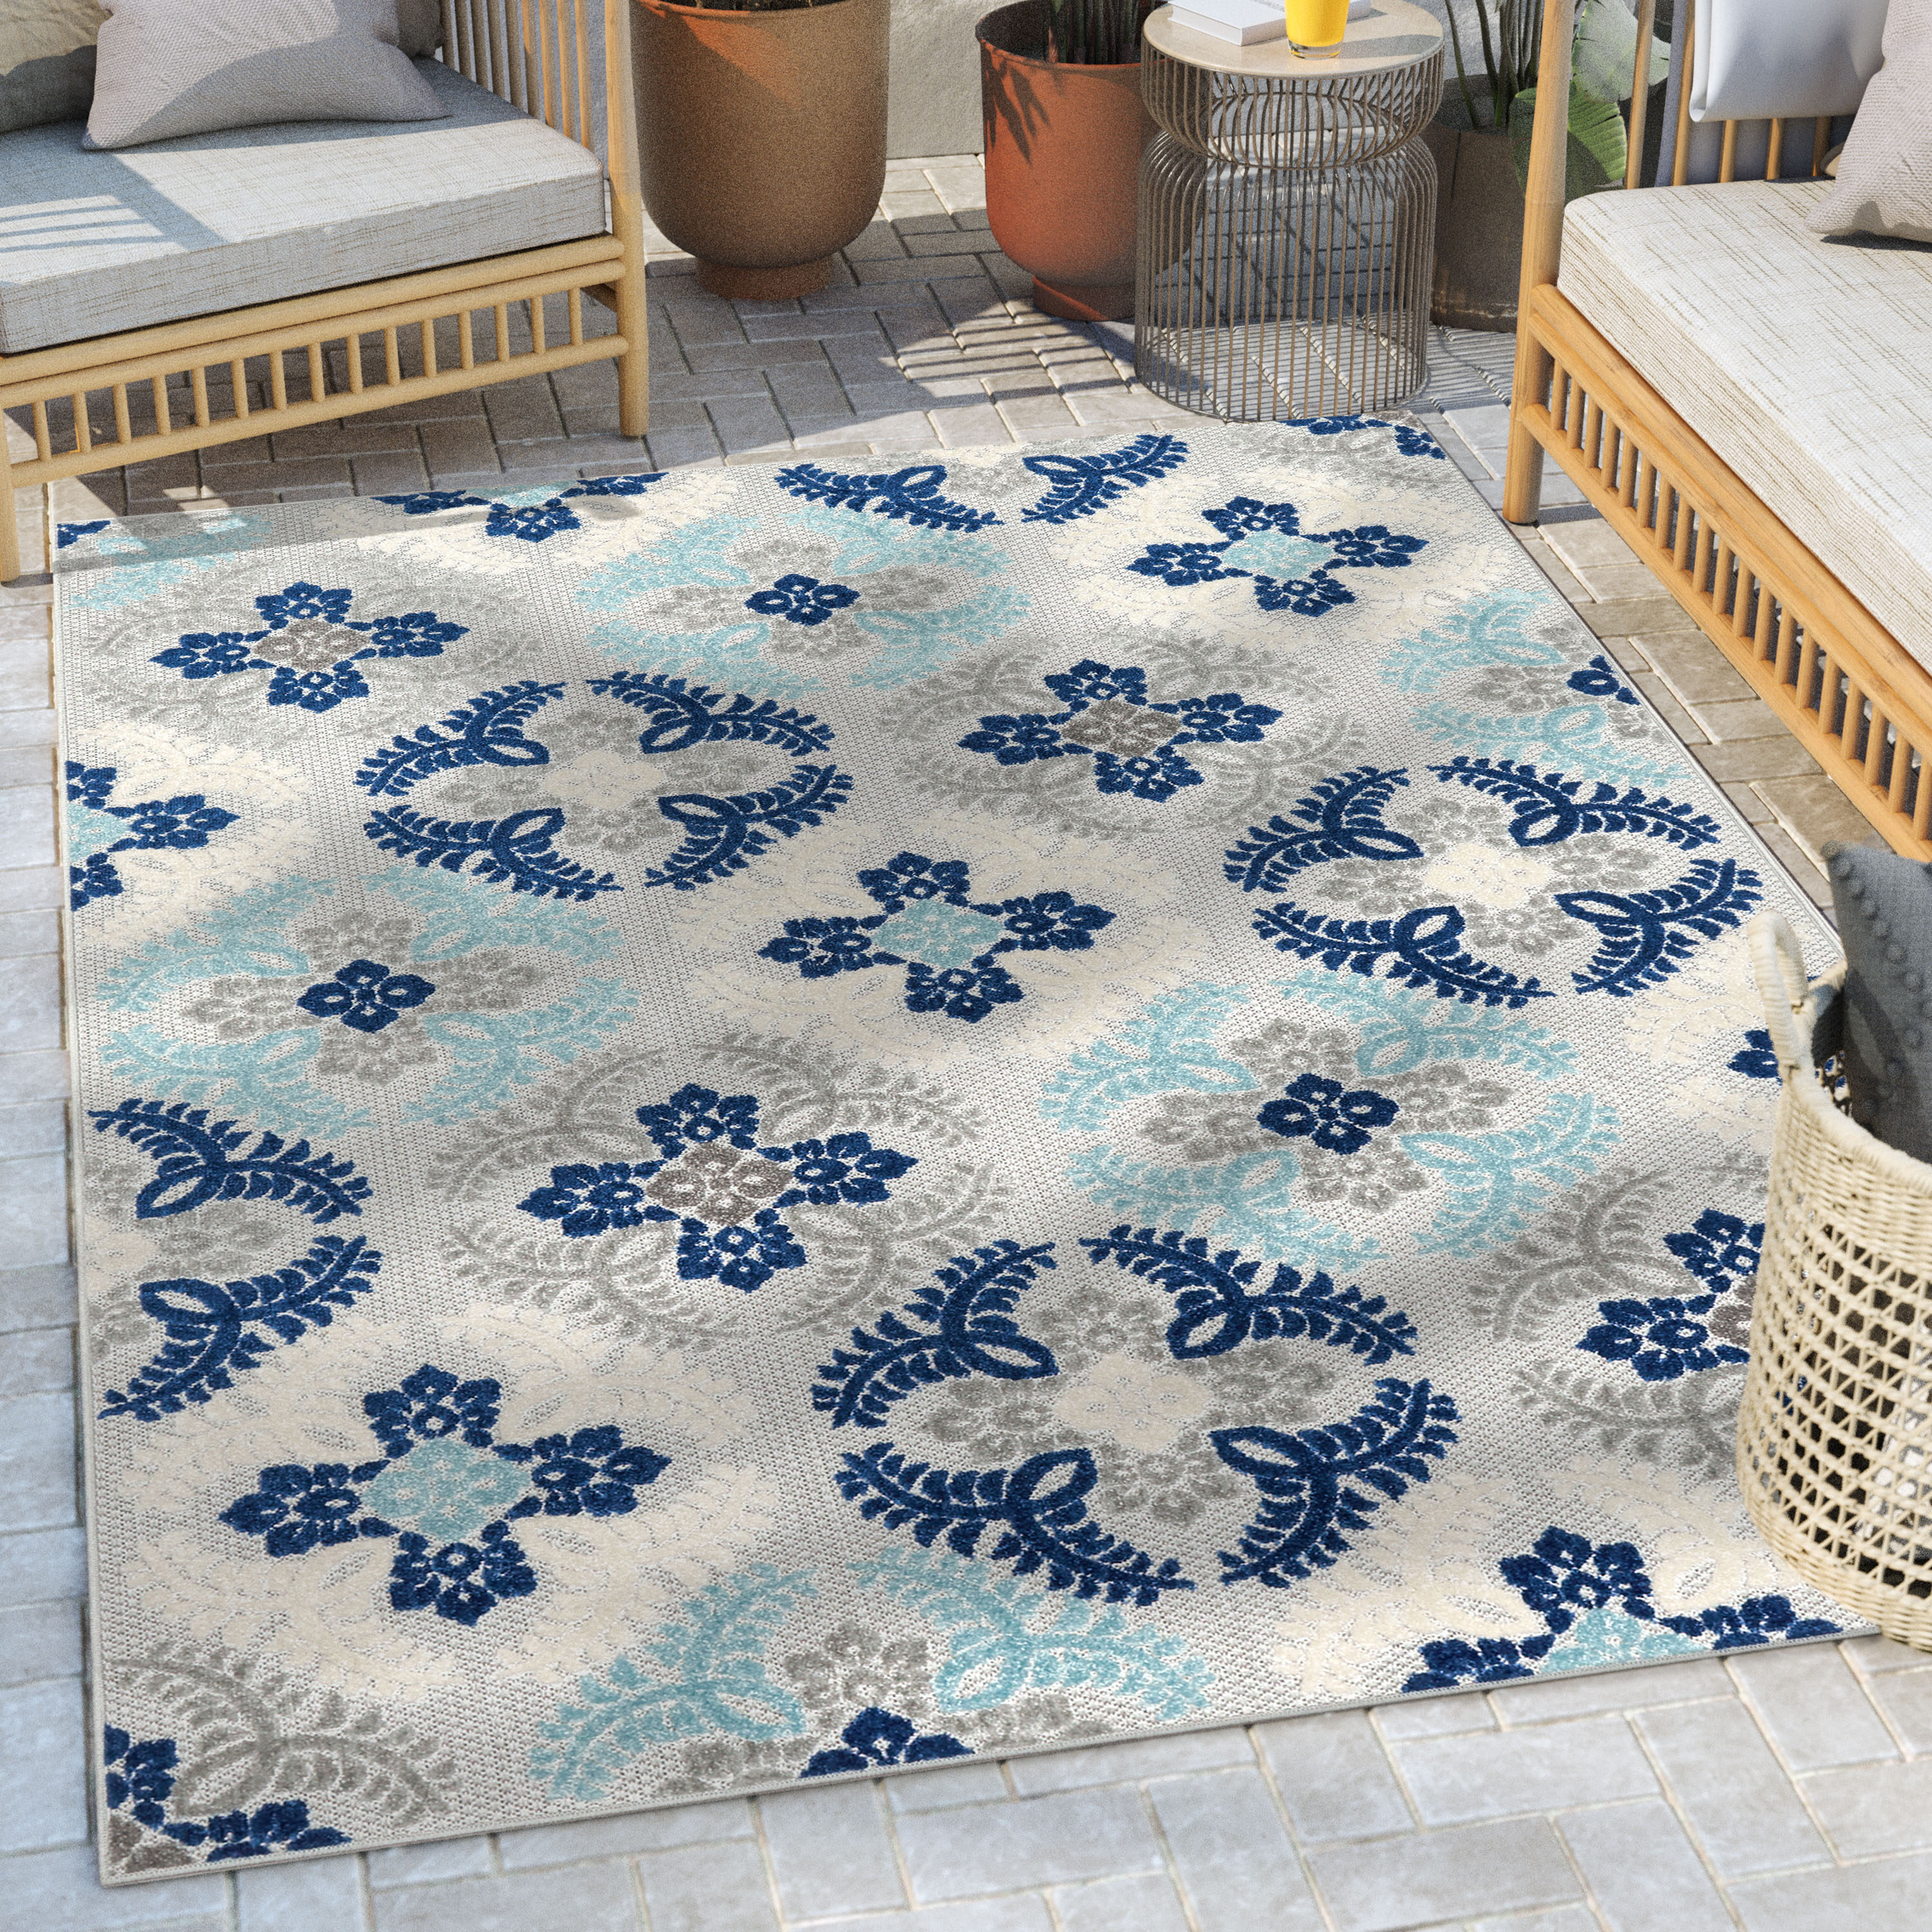 Geometric Blue at x Rugs Modern department 5 Mid-century Woven Indoor/Outdoor Rug Frieze the in Area Well 7